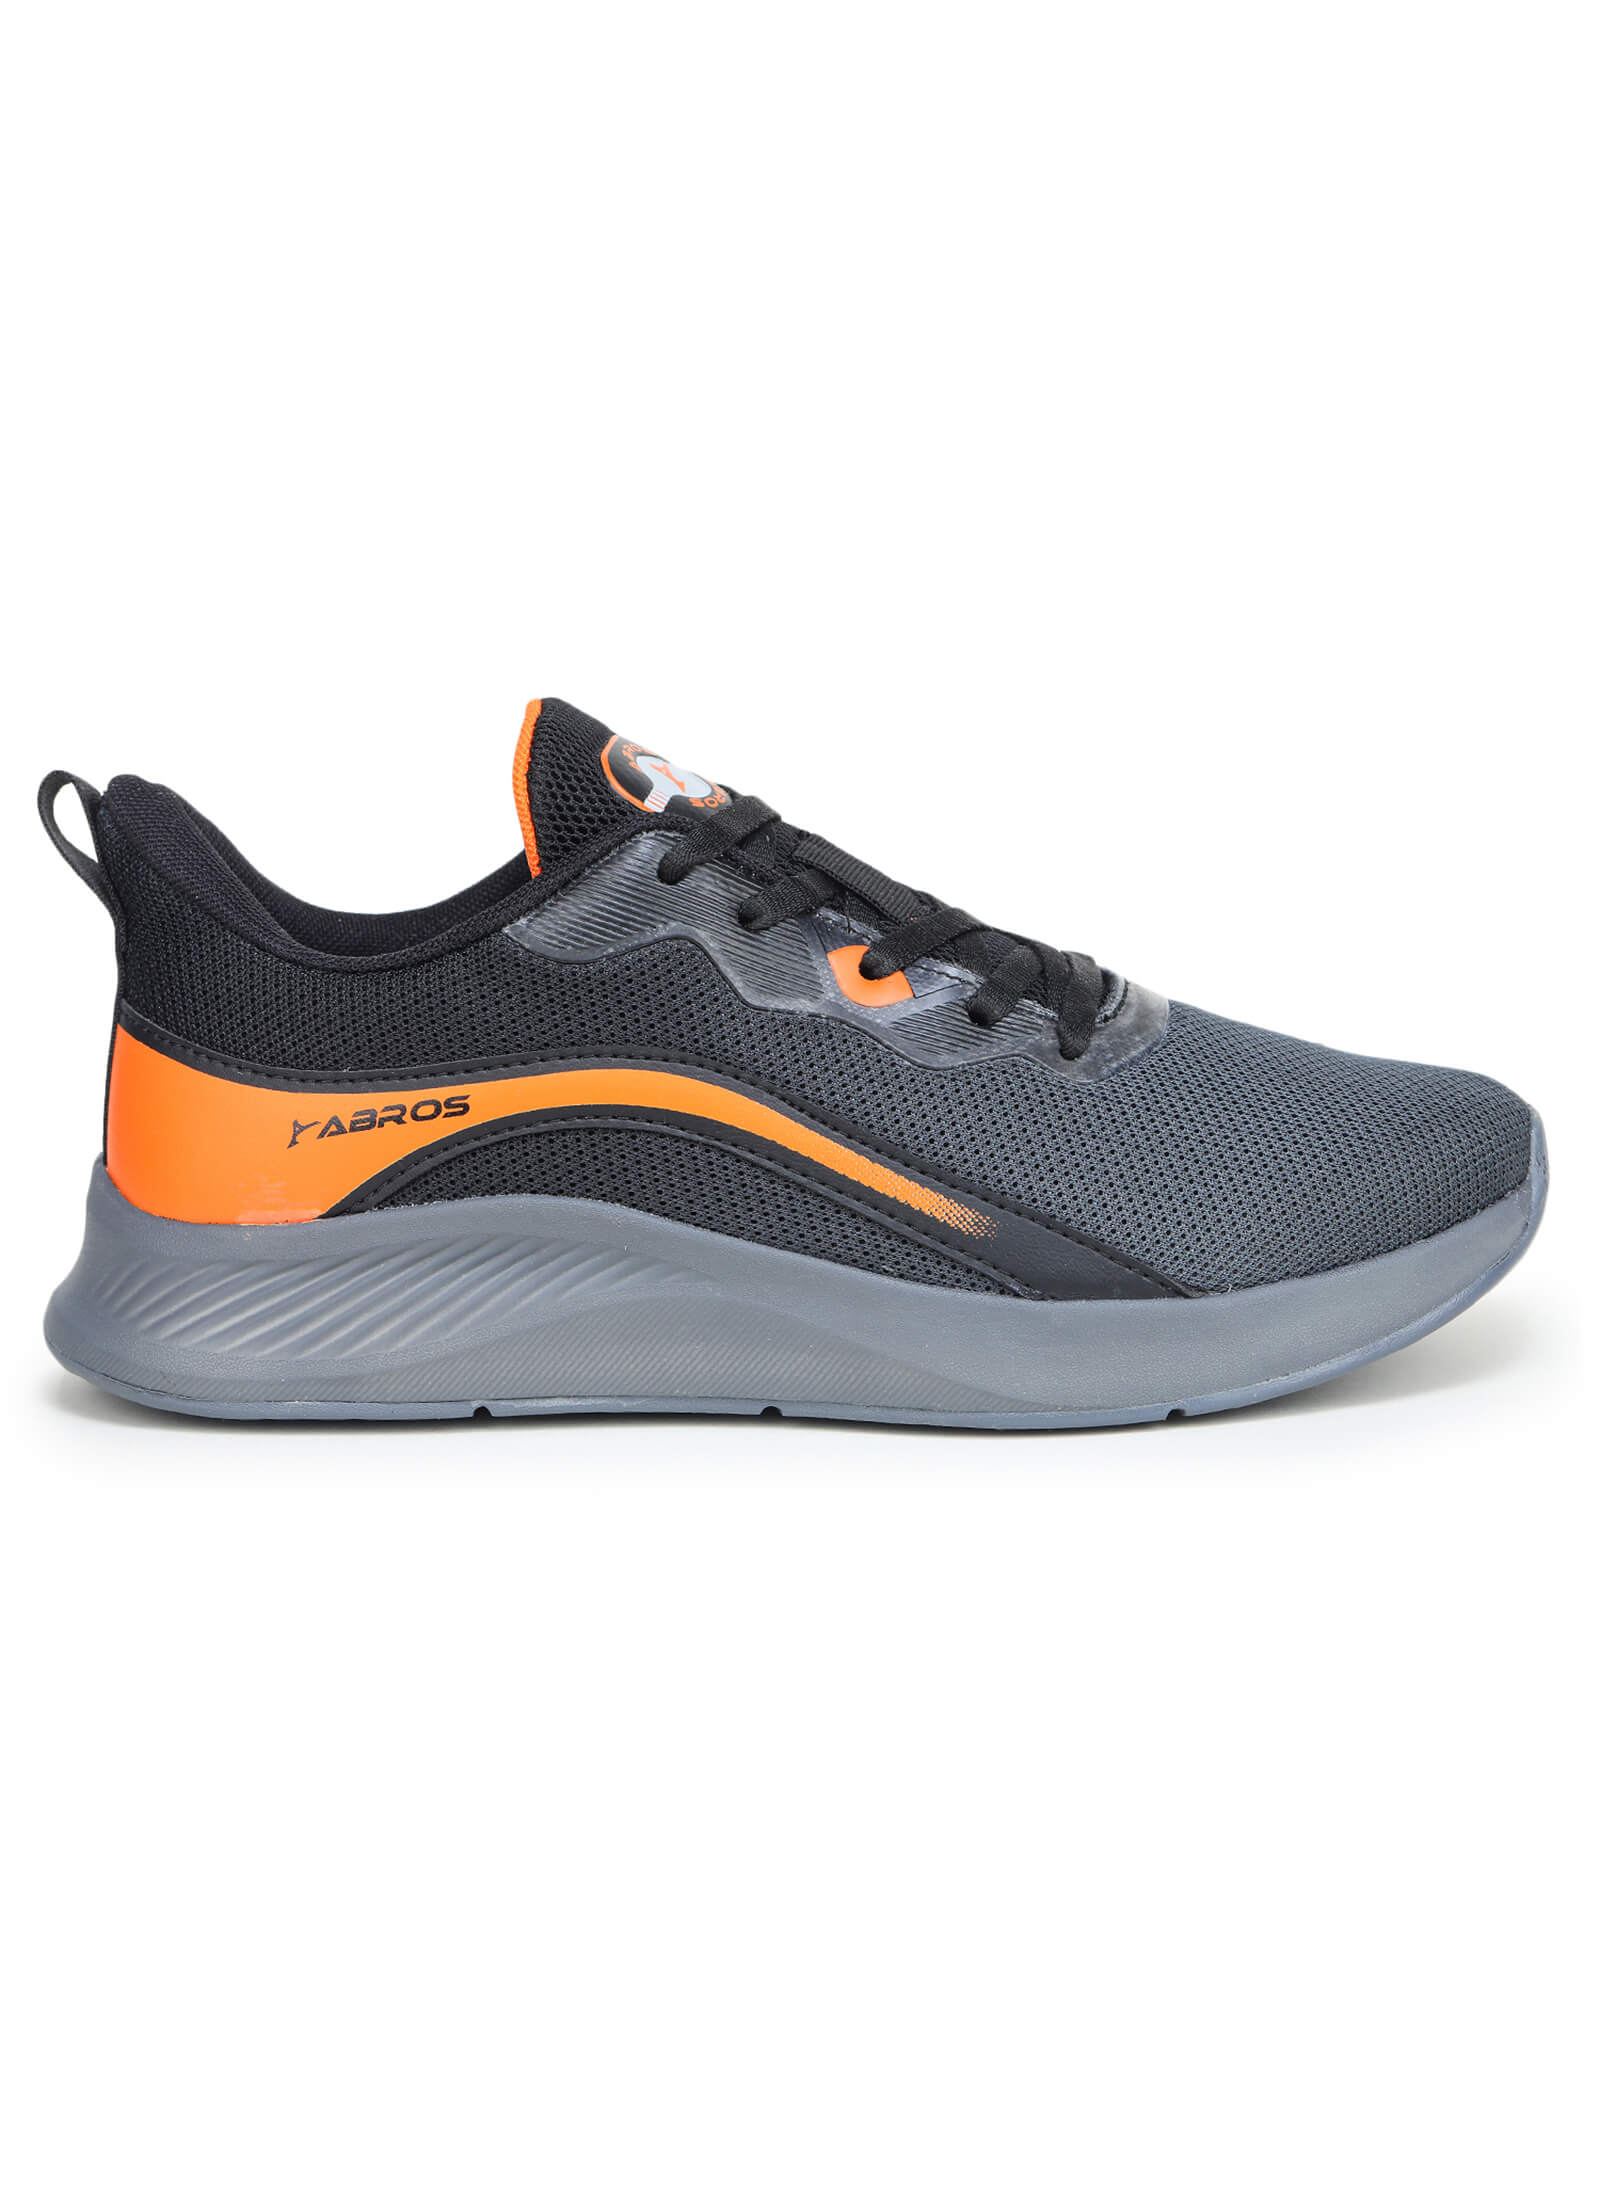 Alin Sports Shoes For Men